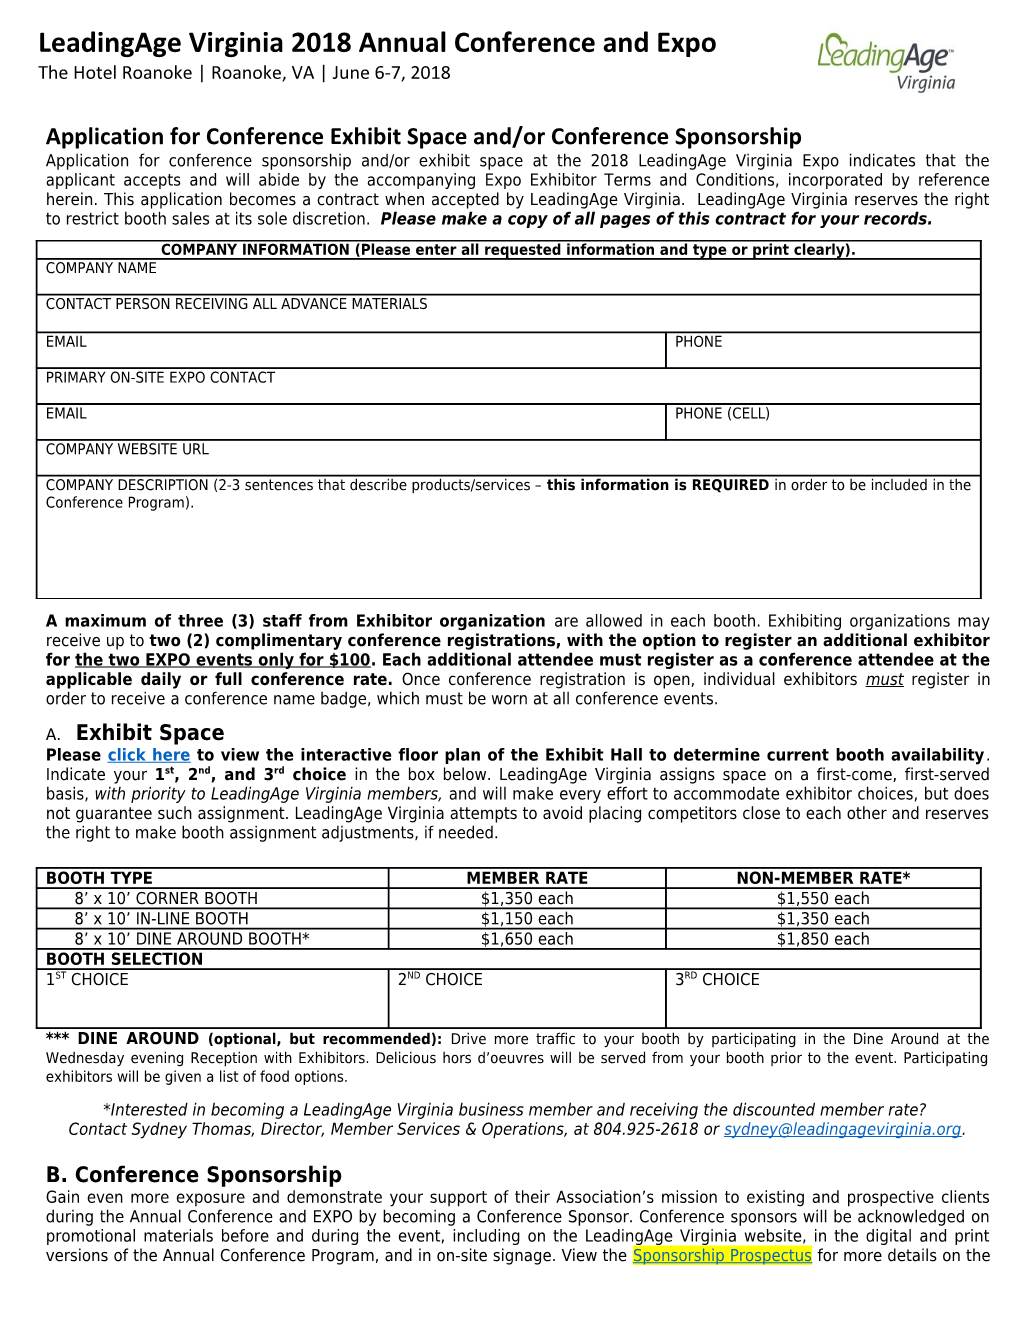 Application for Conference Exhibit Space And/Or Conference Sponsorship